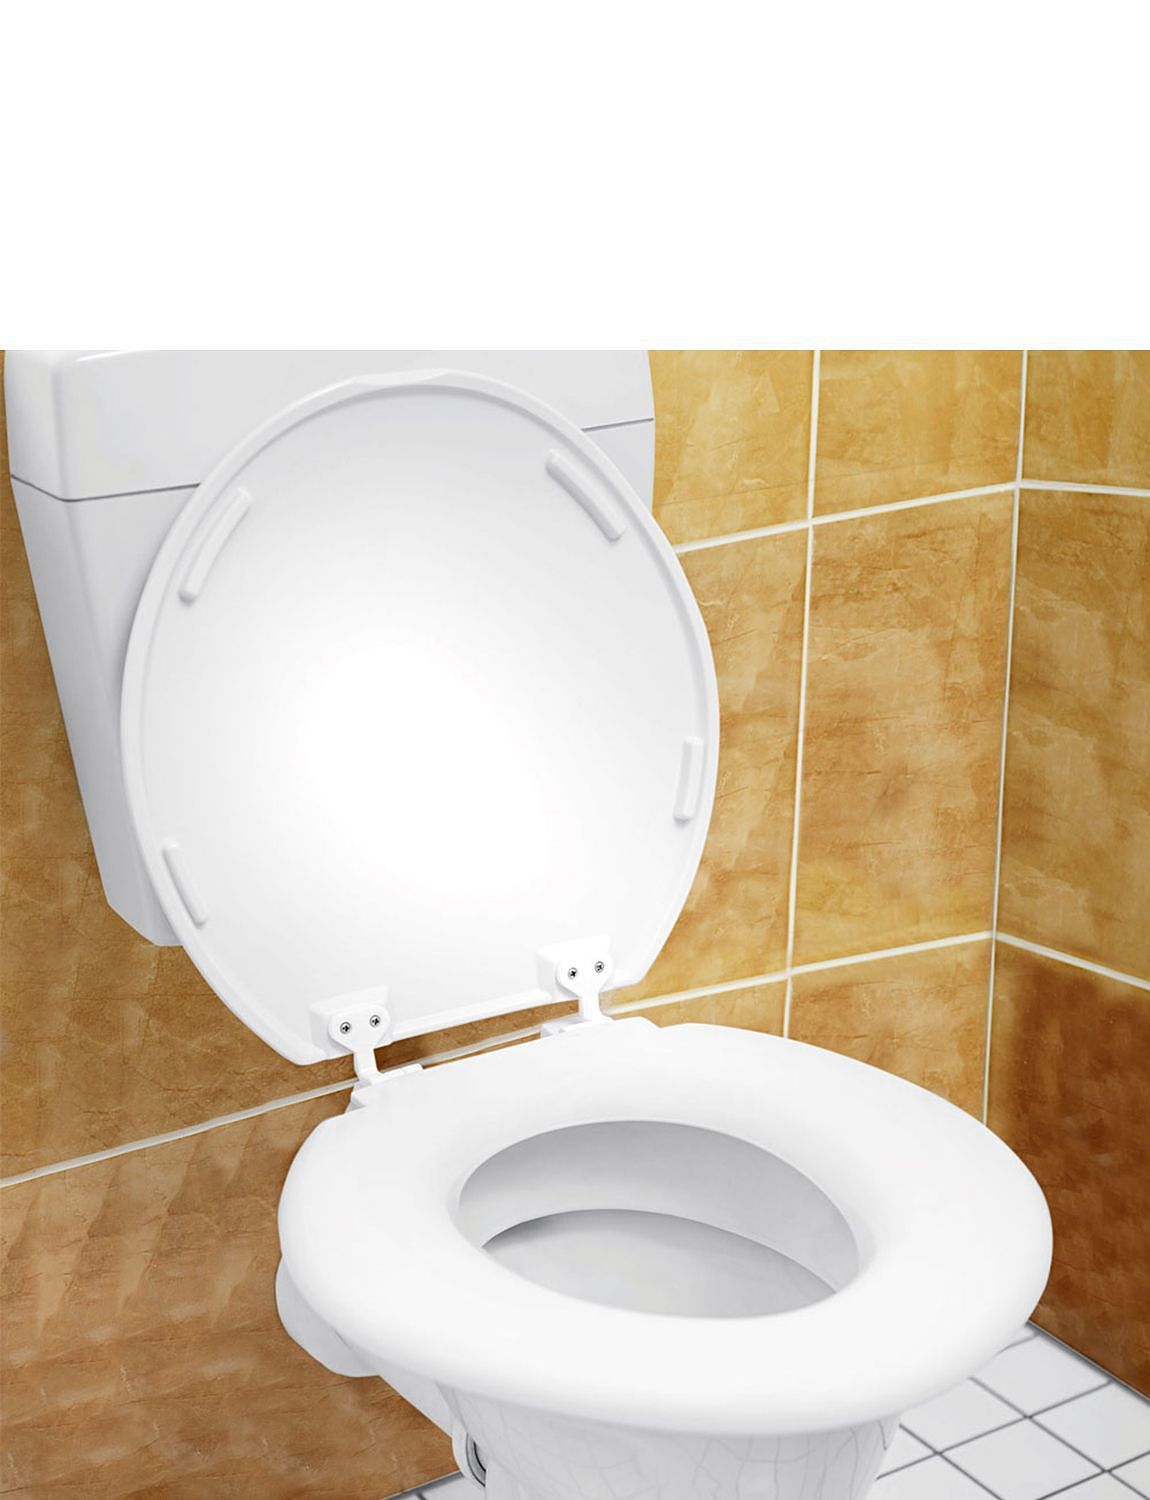 Wide toilet seat